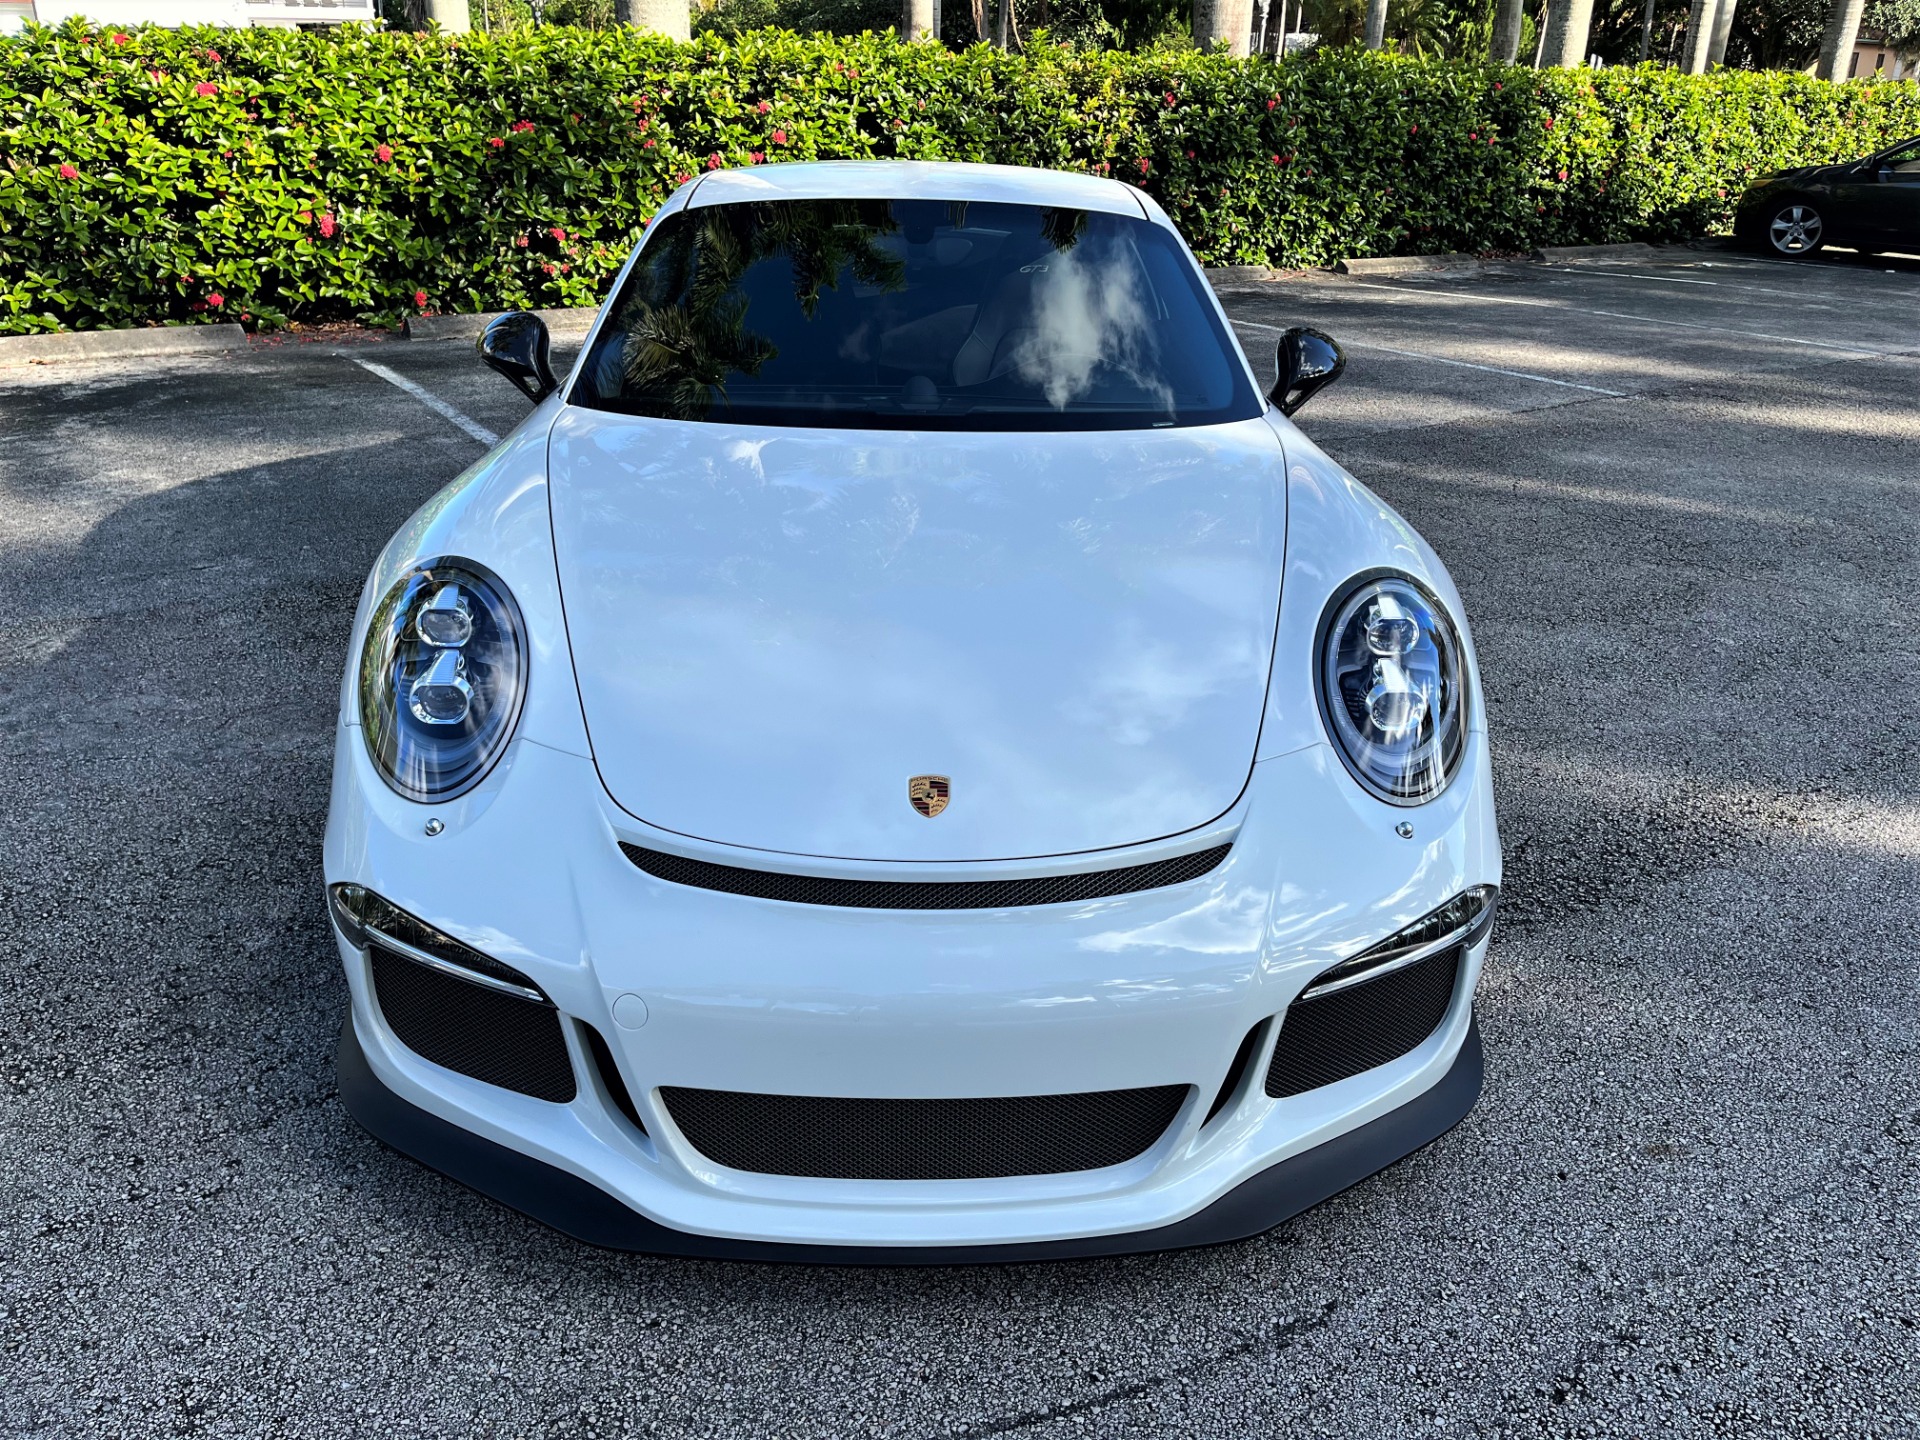 Used 2014 Porsche 911 GT3 for sale $142,850 at The Gables Sports Cars in Miami FL 33146 3